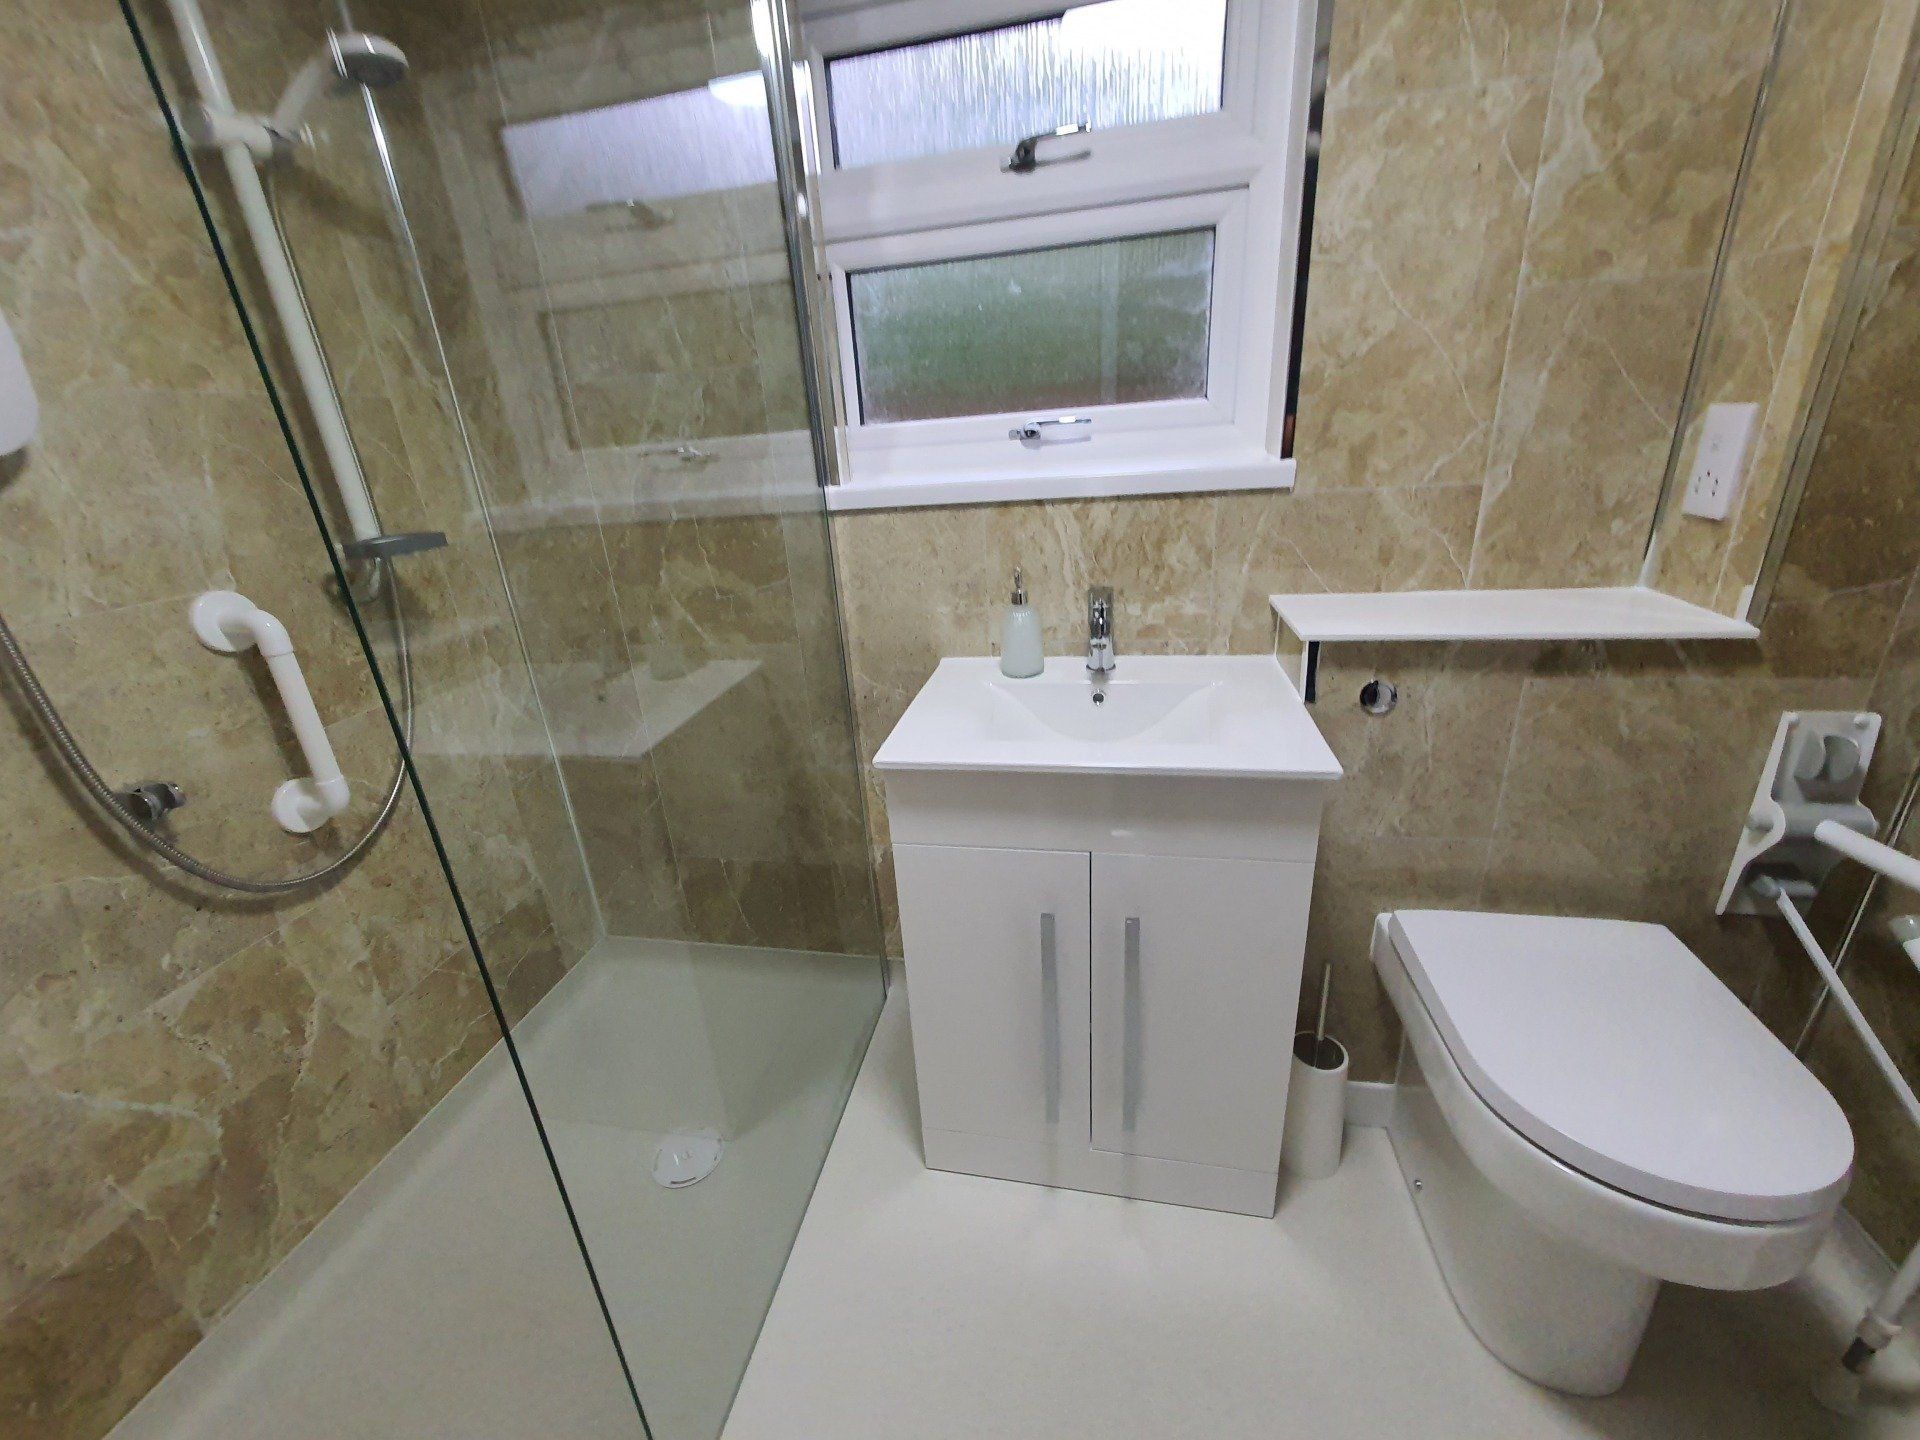 after accessible bathroom installation